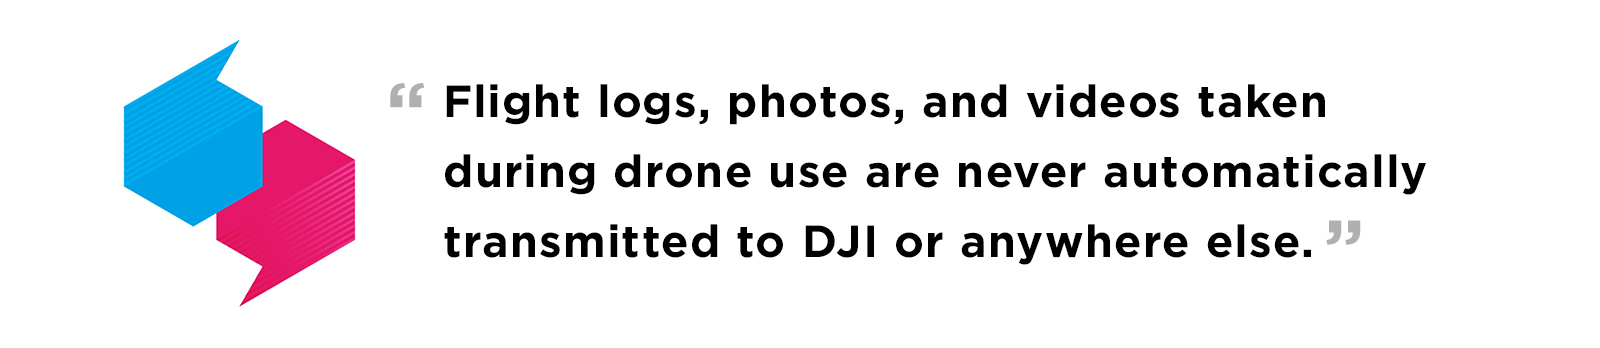 5 Drone Myths Busted - Pull Quote